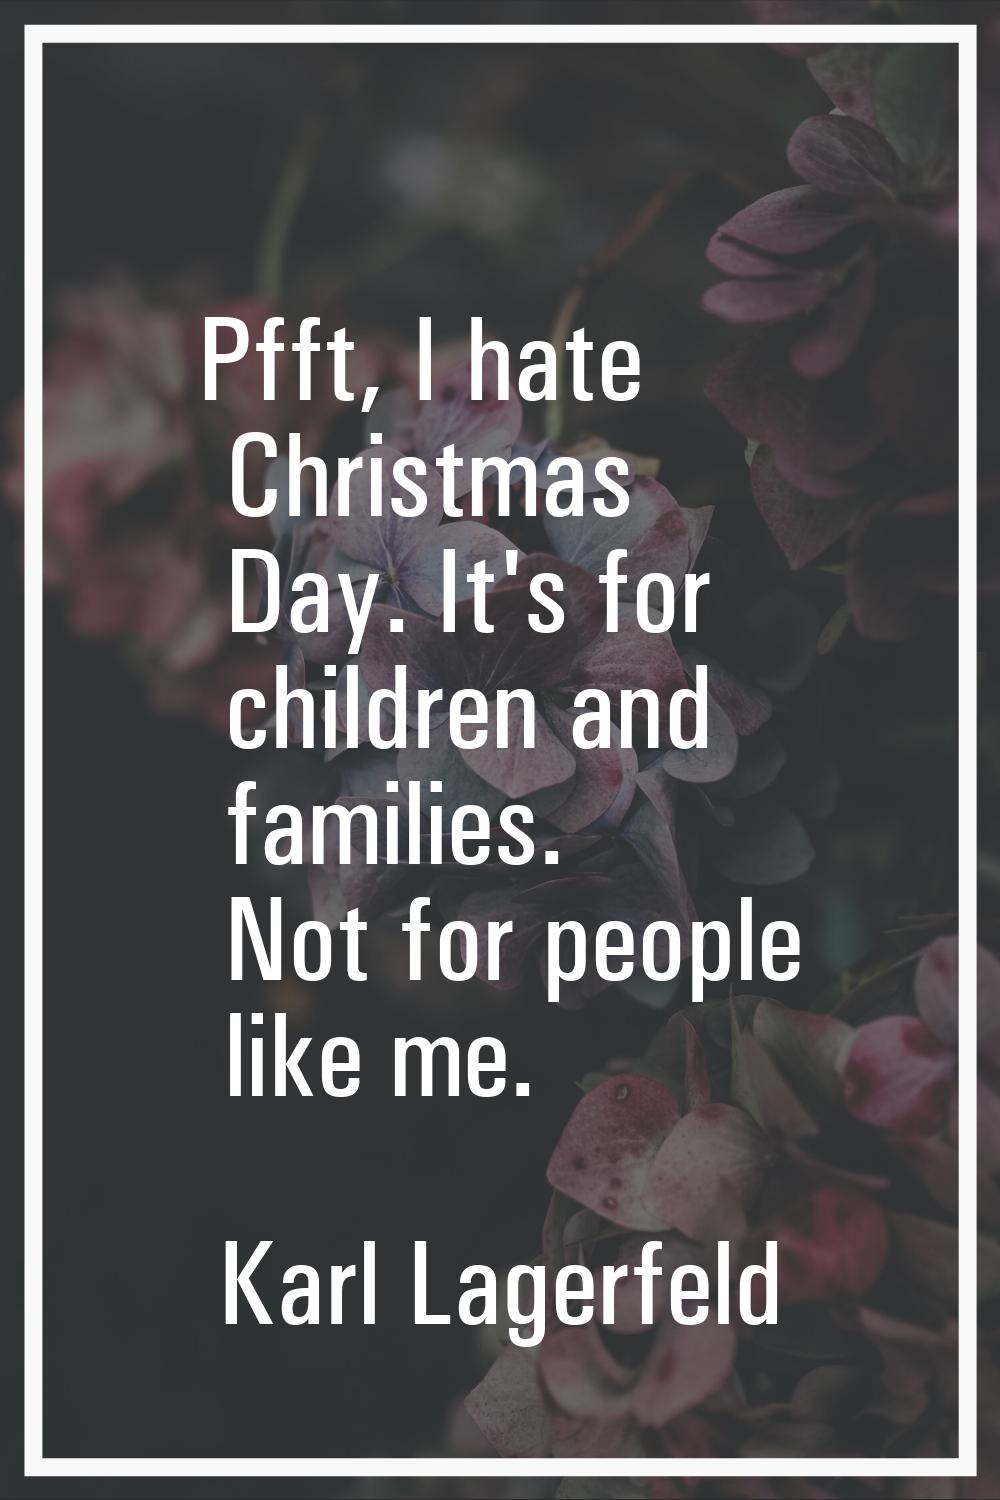 Pfft, I hate Christmas Day. It's for children and families. Not for people like me.